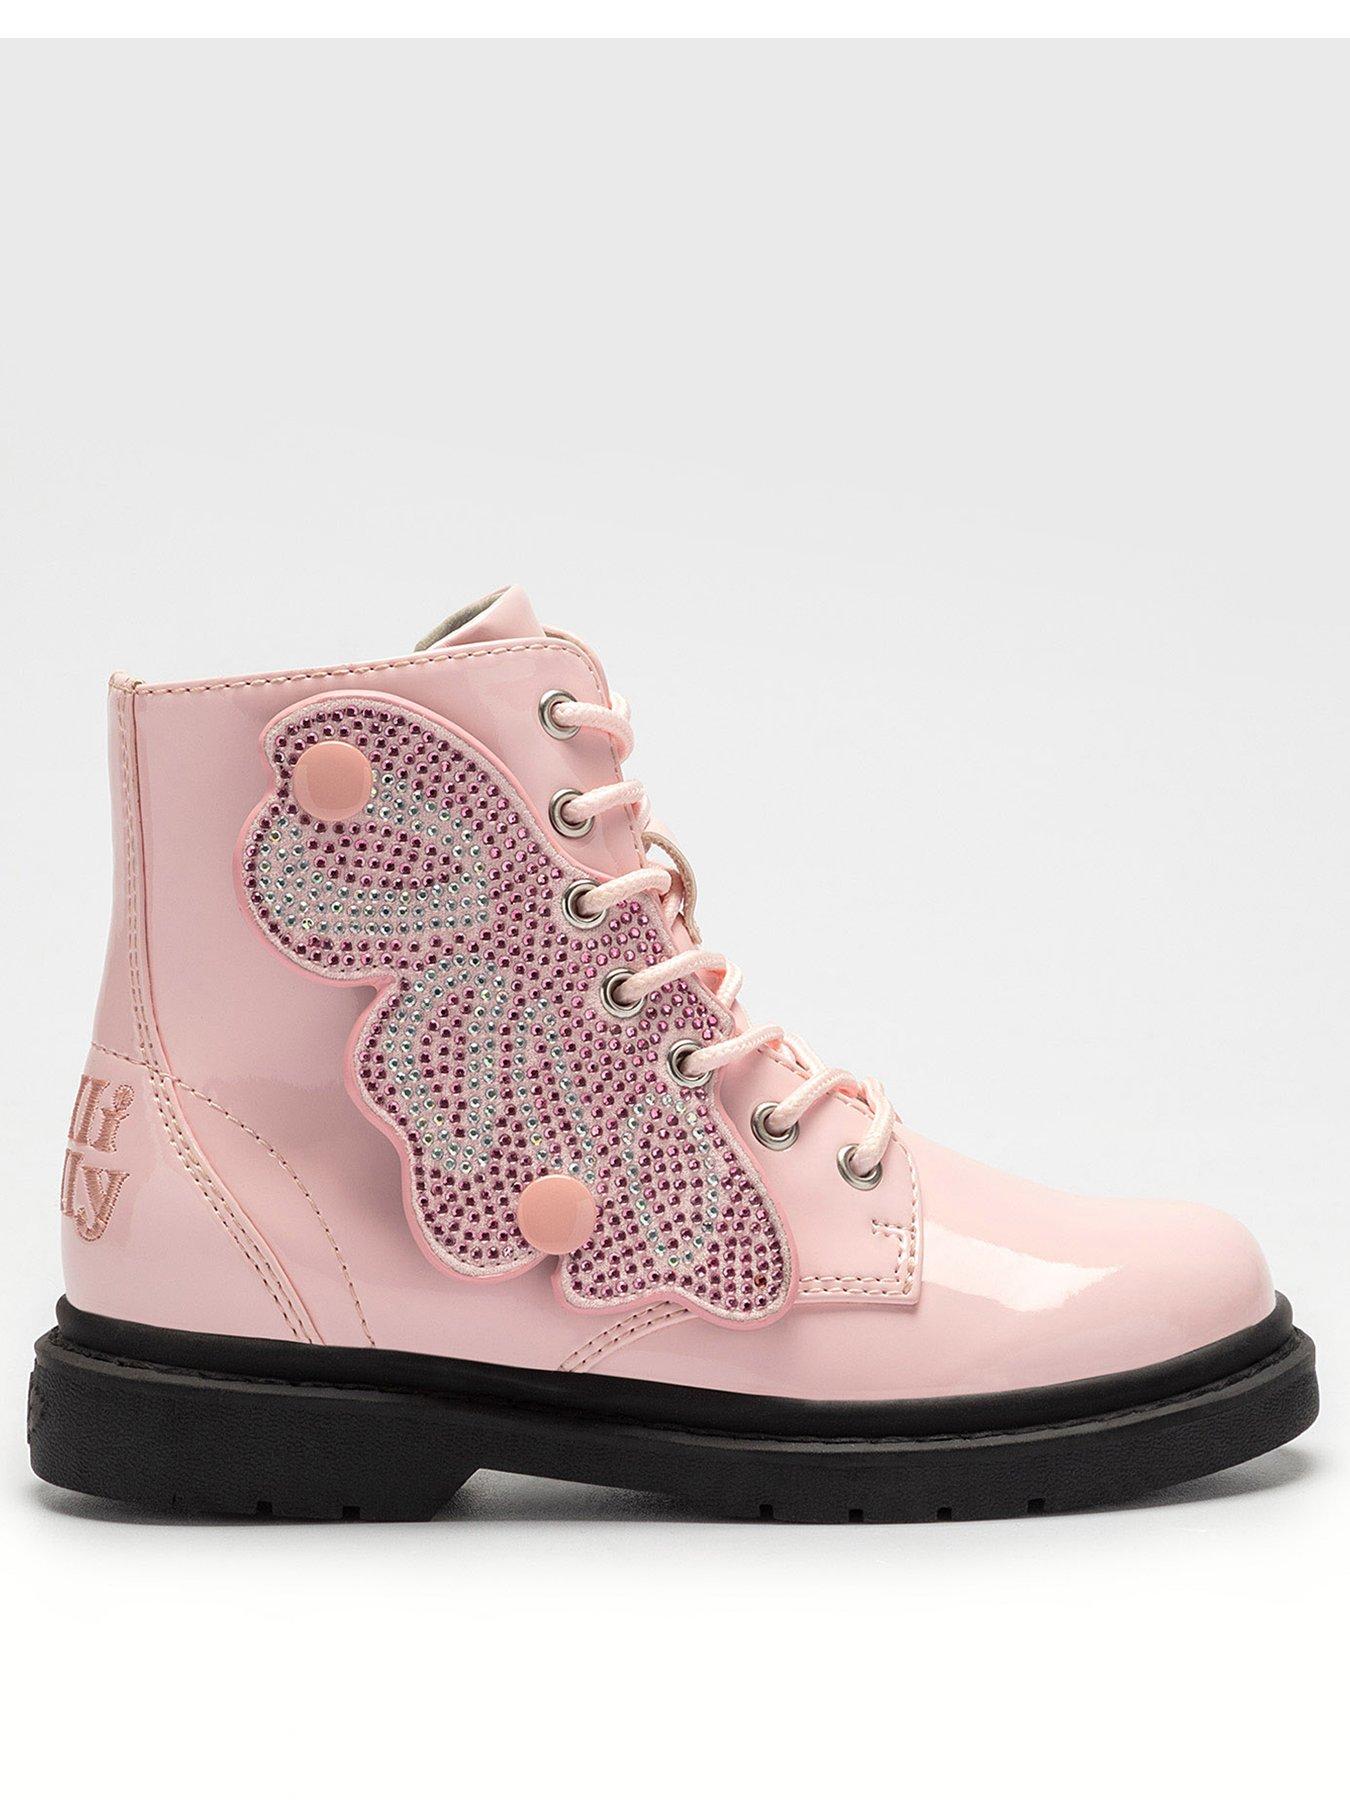 Shoes & boots Diamond Wings Patent Ankle Boots - Pink